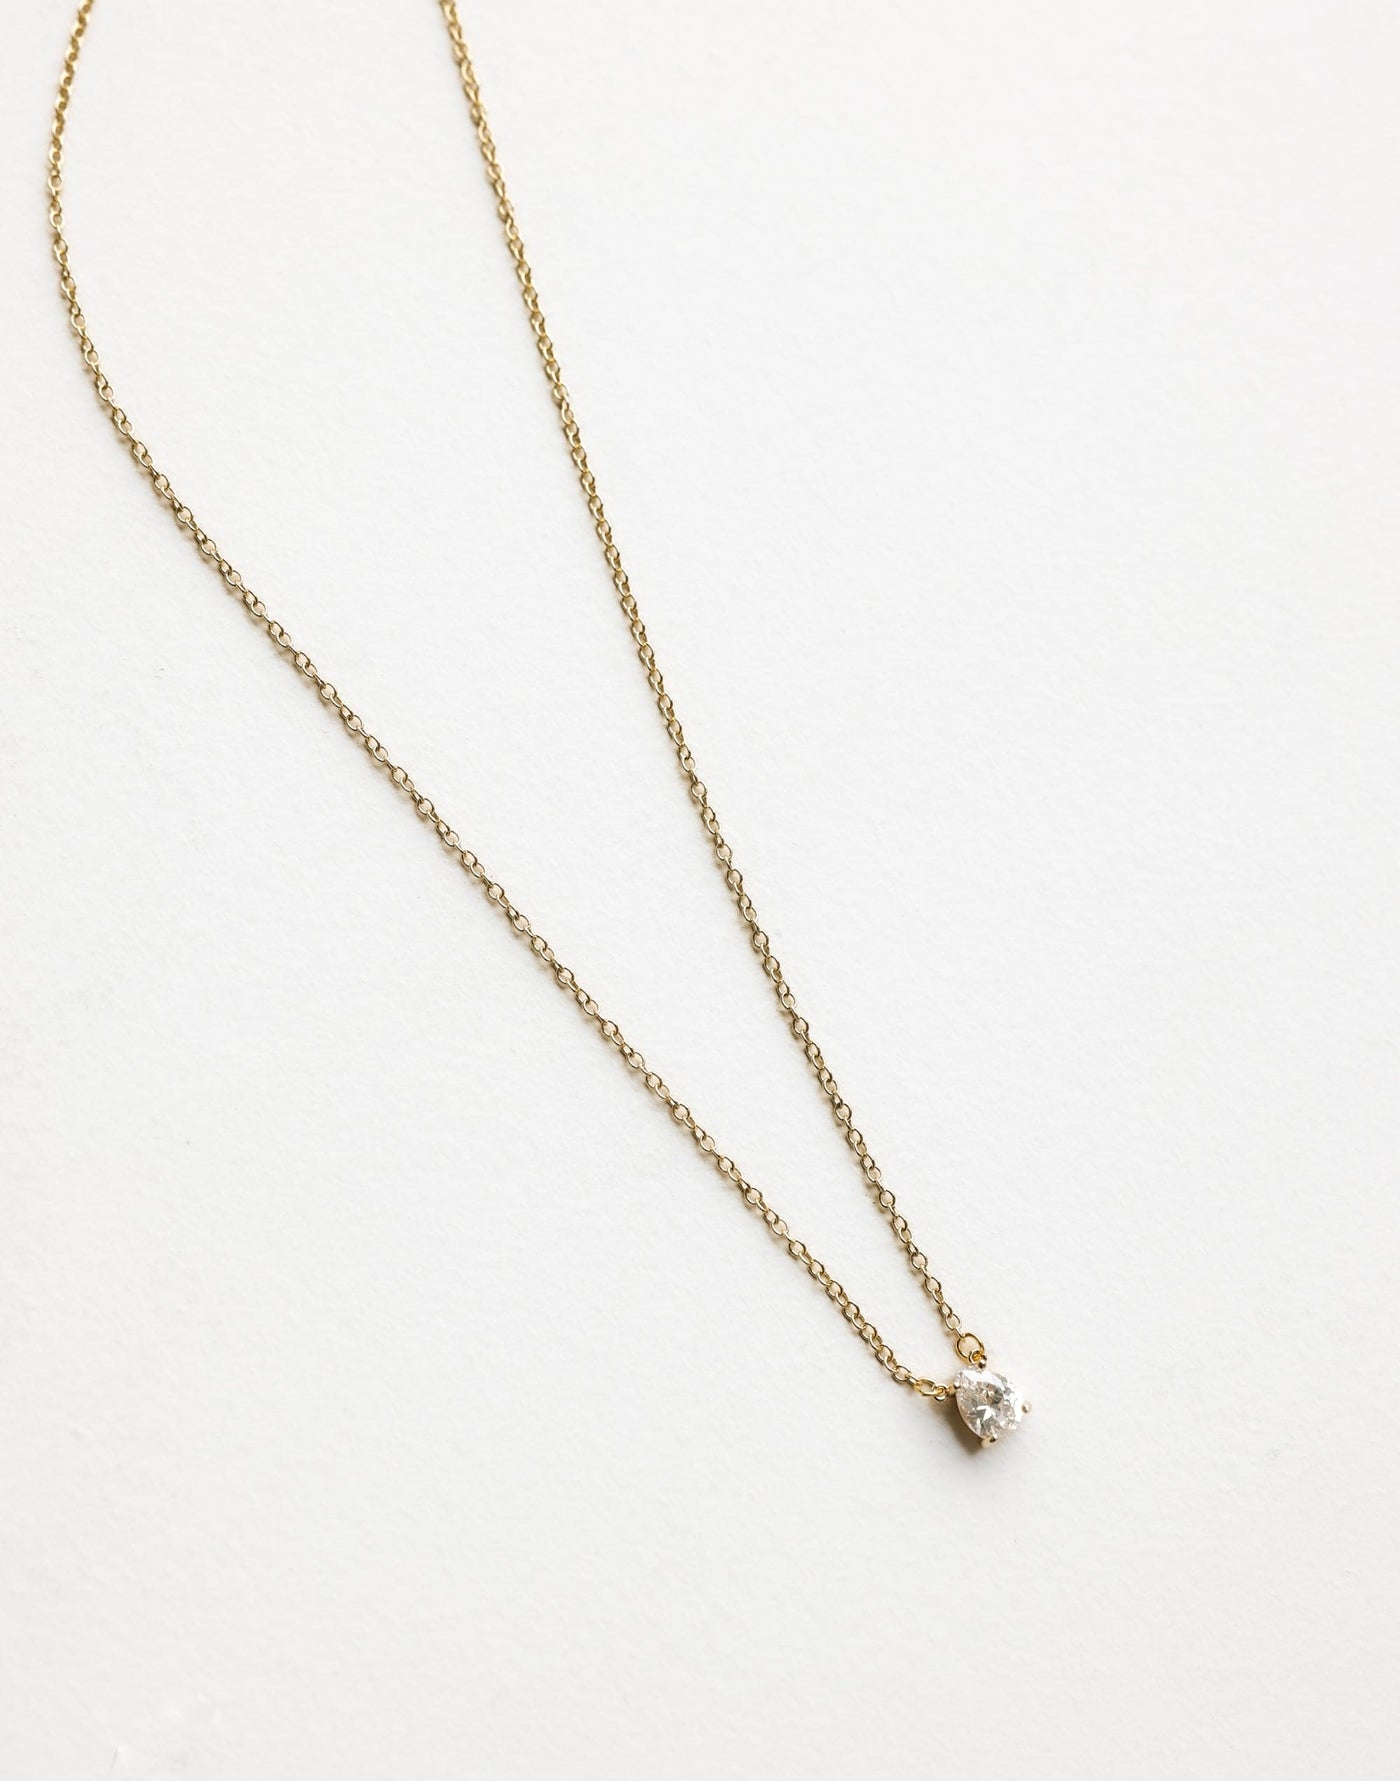 Bela Necklace (Gold) | CHARCOAL Exclusive - Imitation Diamond Pendant Thin Chain Stainless Steel Necklace - Women's Accessories - Charcoal Clothing